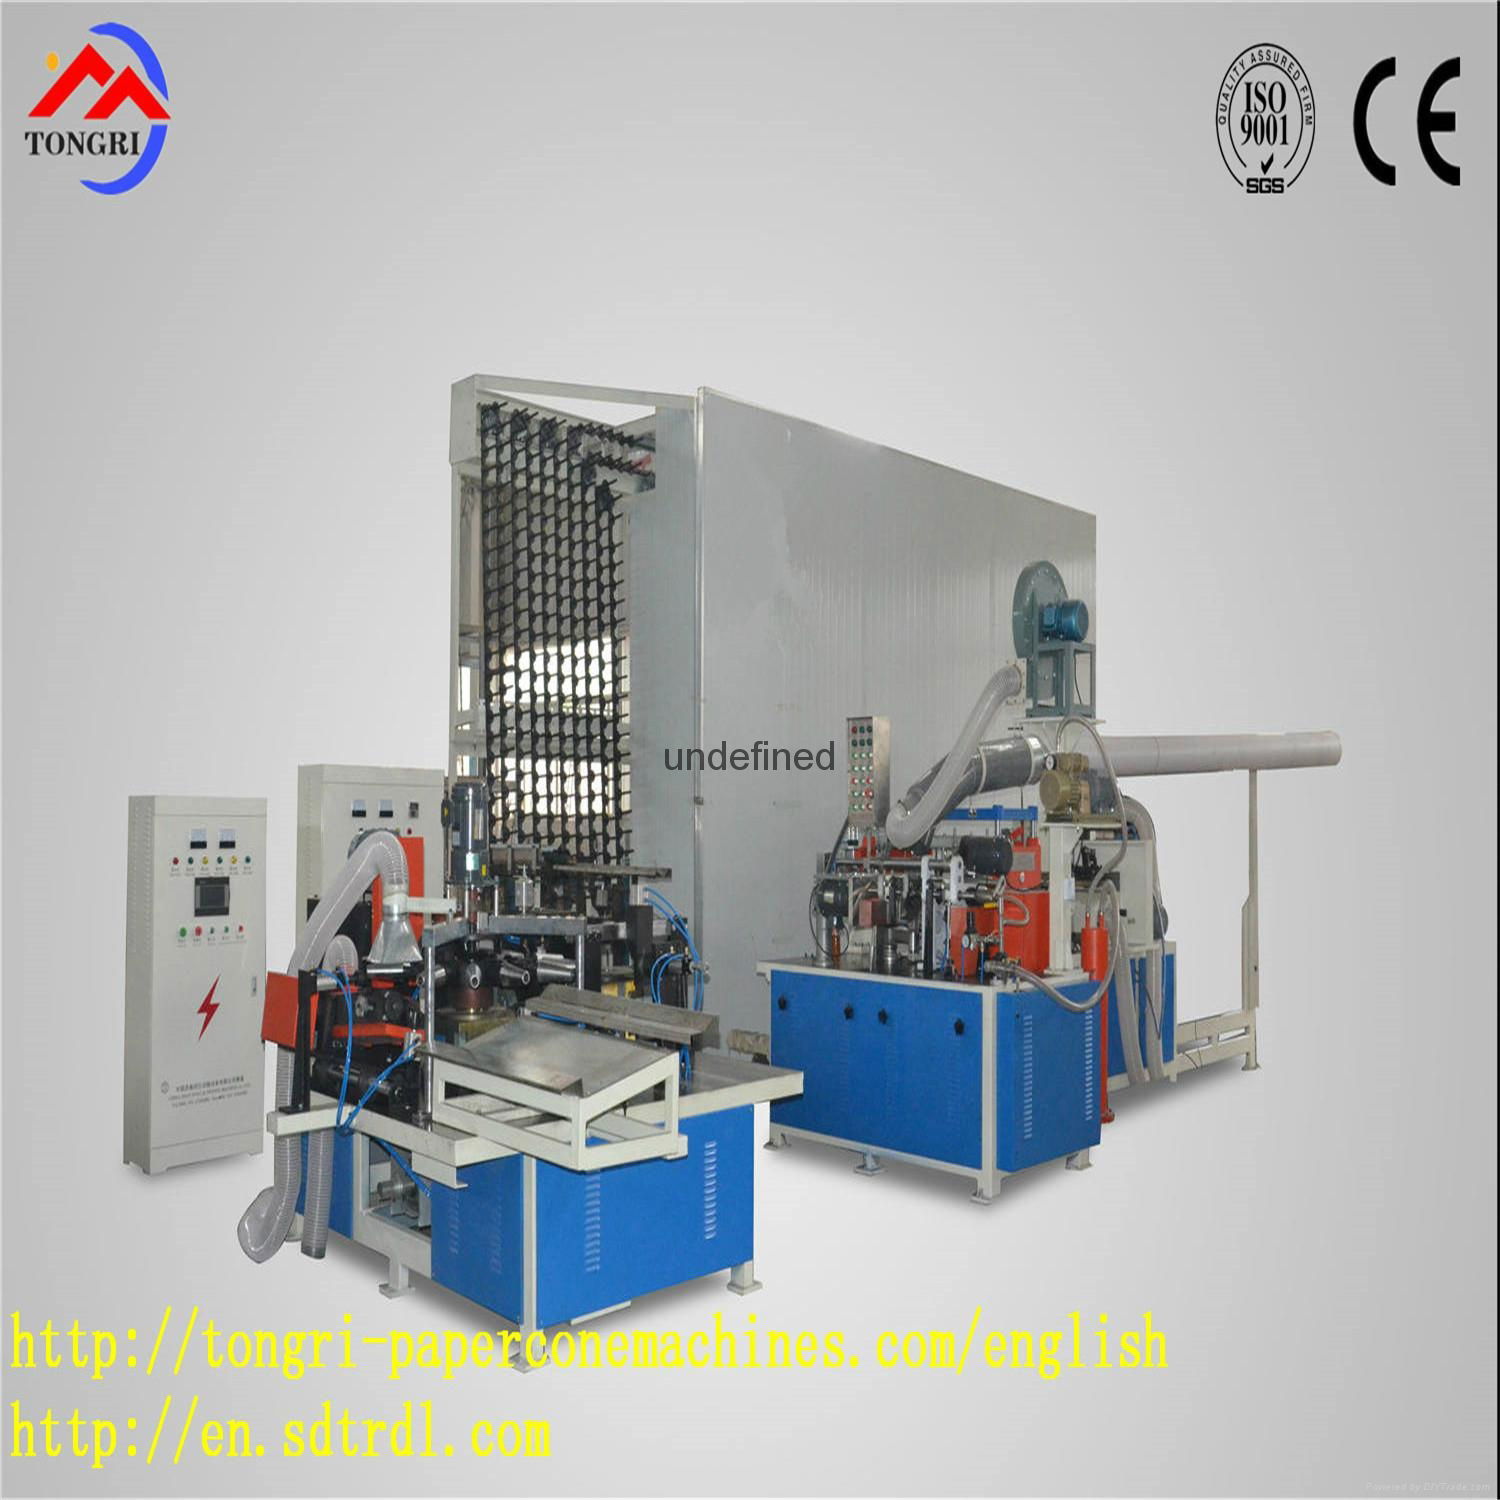 TRZ-2012 full automatic conical paper tube production line